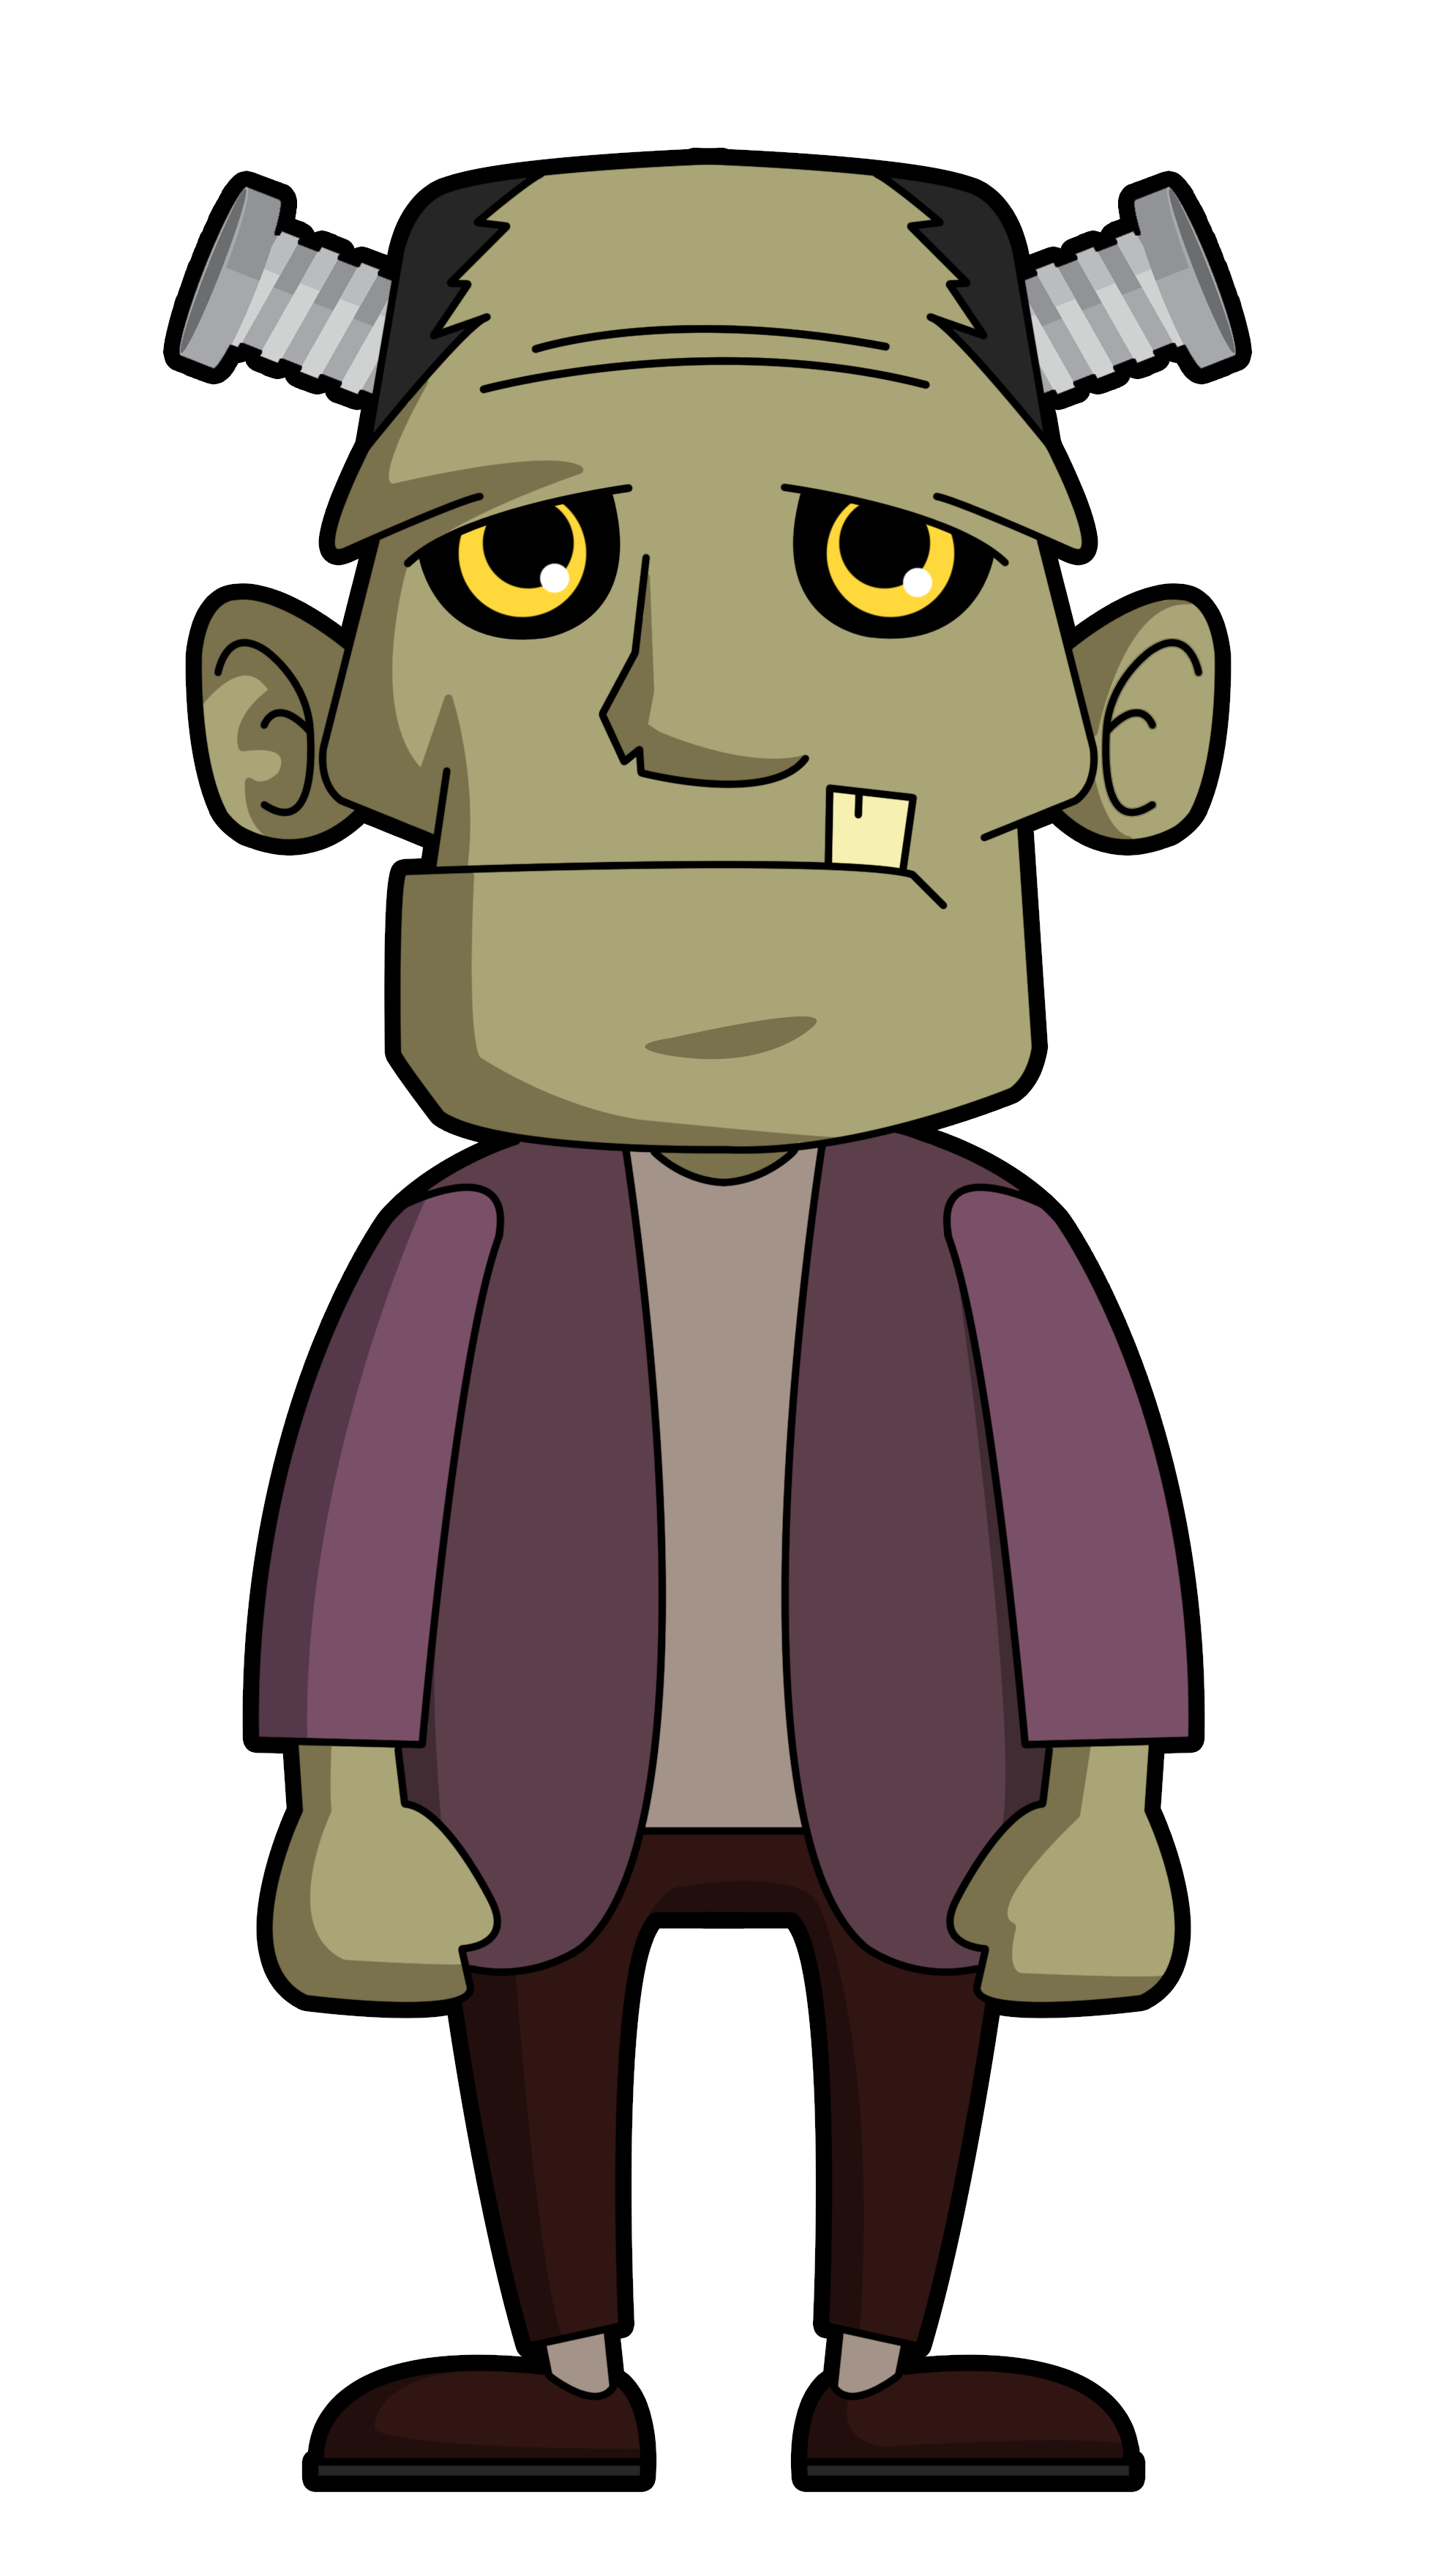 Frankenstein free to use cliparts